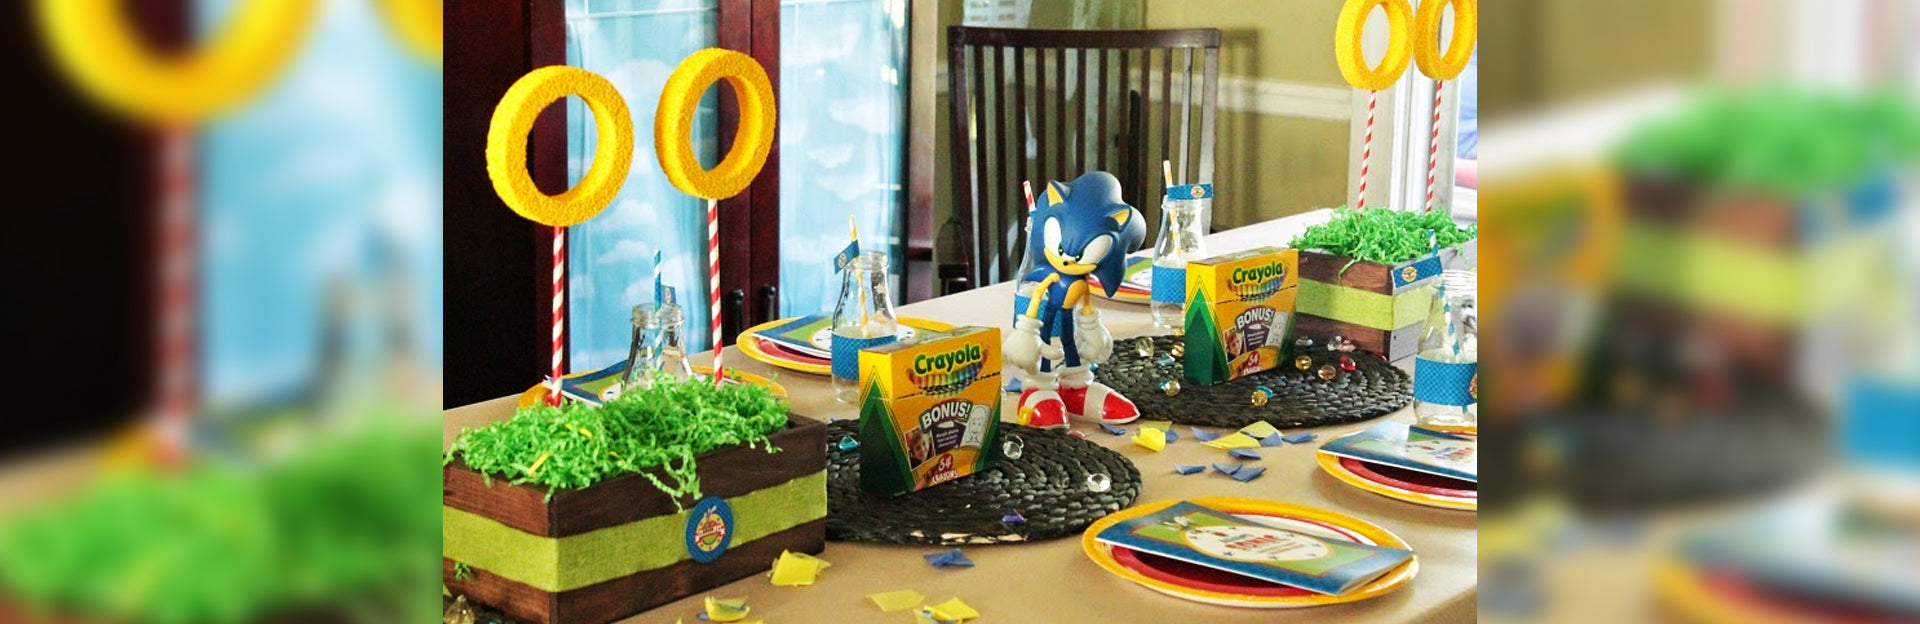 Sonic The Hedgehog Party Ideas - Moms & Munchkins